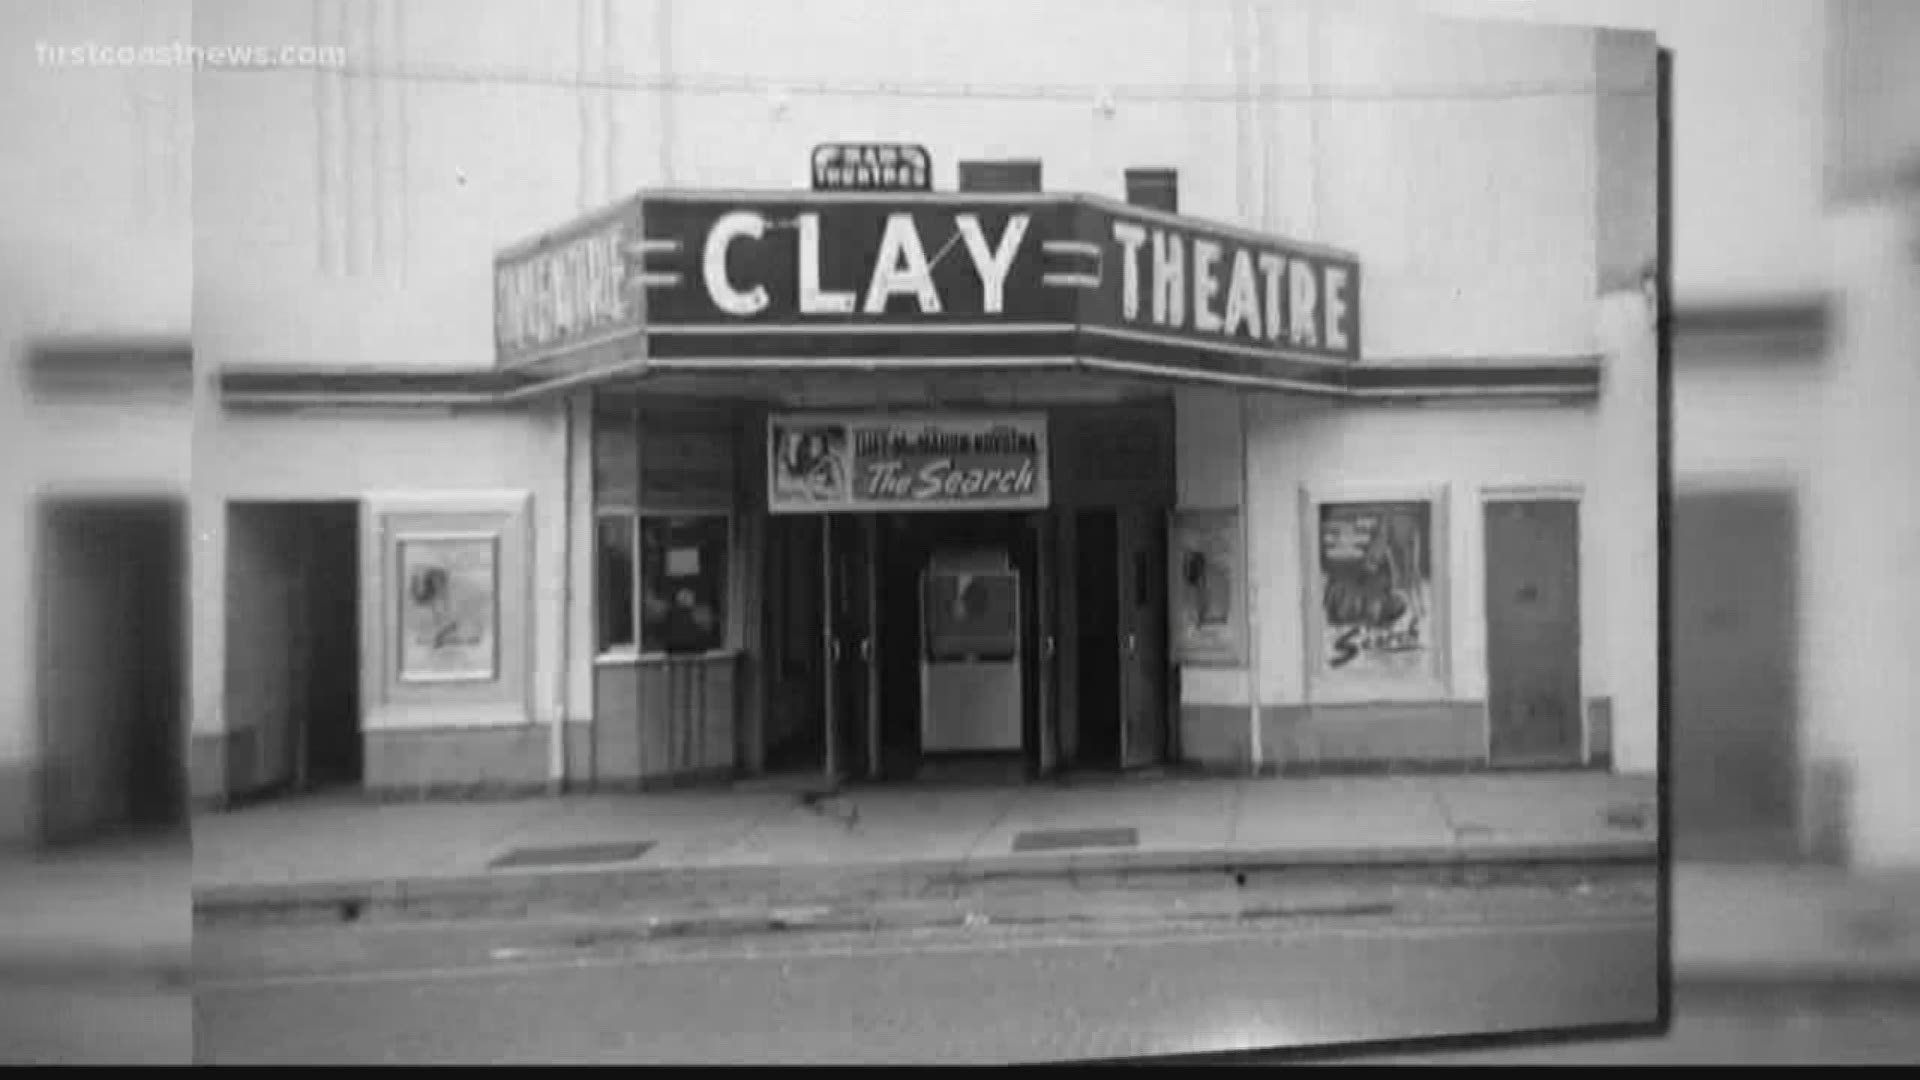 Construction crews were working on giving the Clay Theatre in Green Cove Springs a facelift. It’s been merely vacant for a near decade, but renovations are continuing to turn the iconic landmark from a movie theatre to an event center.